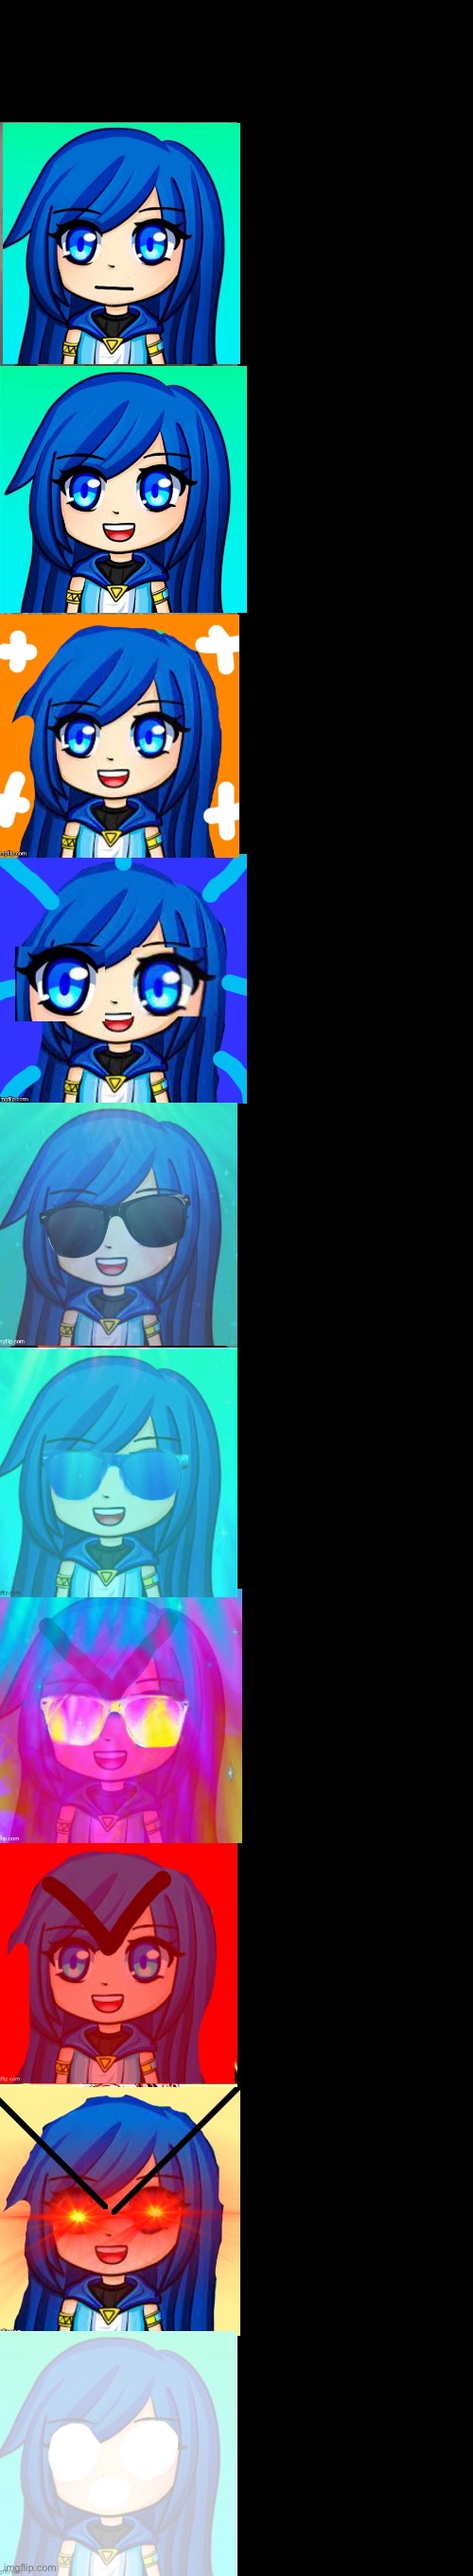 High Quality ItsFunneh Becoming Canny Blank Meme Template